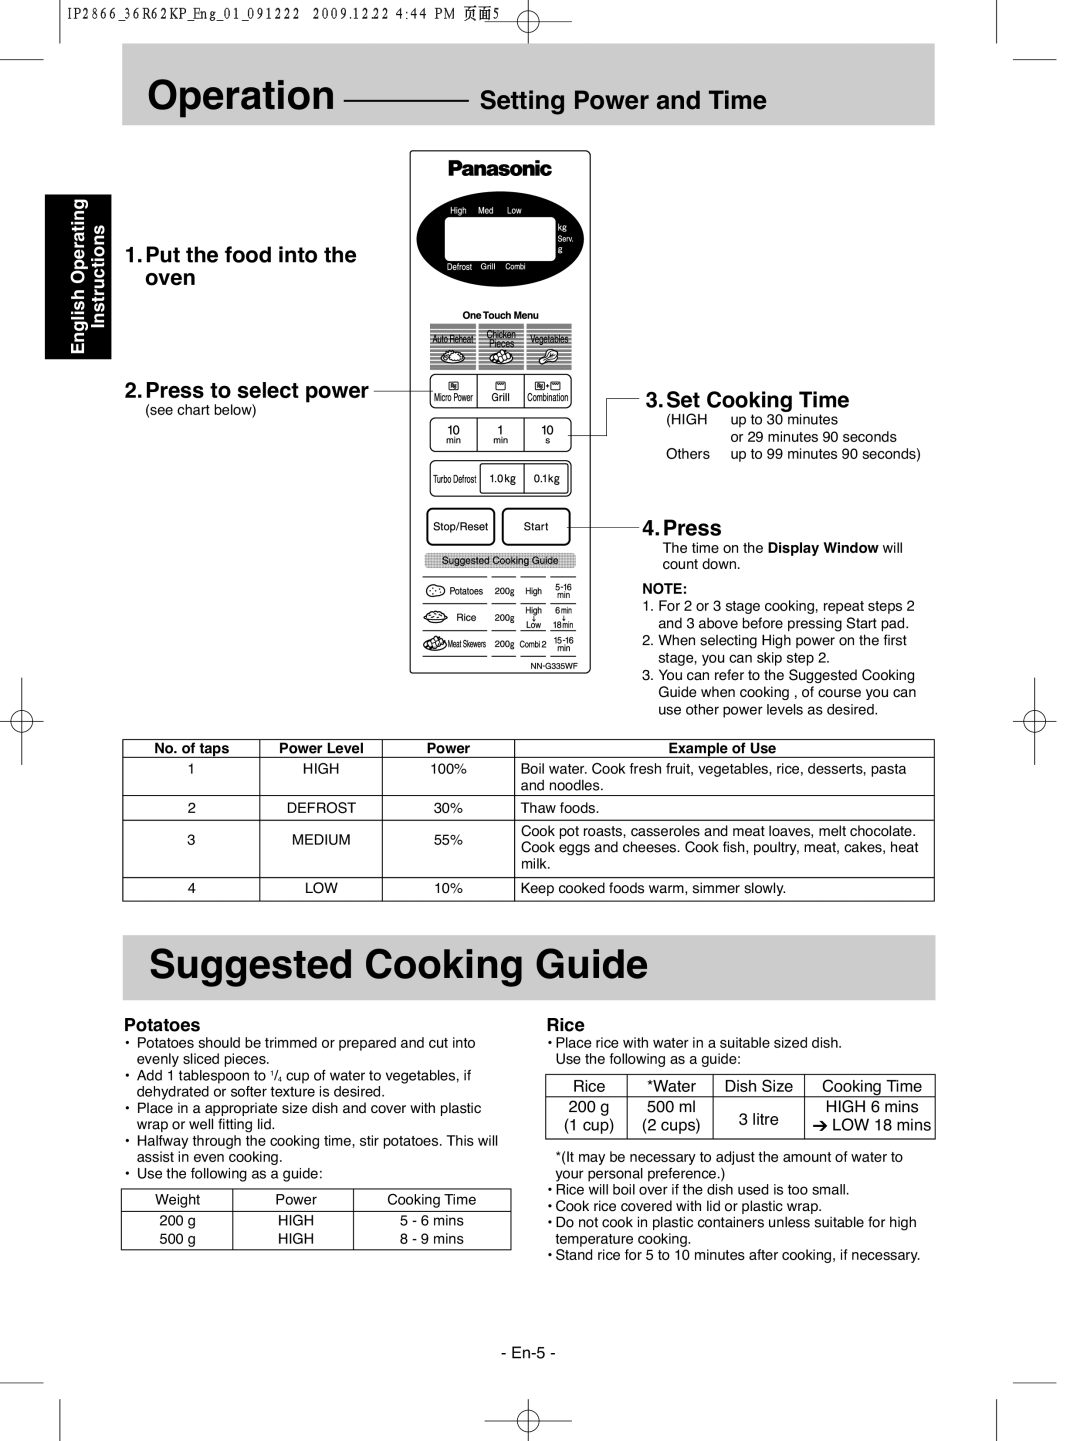 Panasonic NN-G335WF Operation, Suggested Cooking Guide, Setting Power and Time, Set Cooking Time, Press, English Operating 